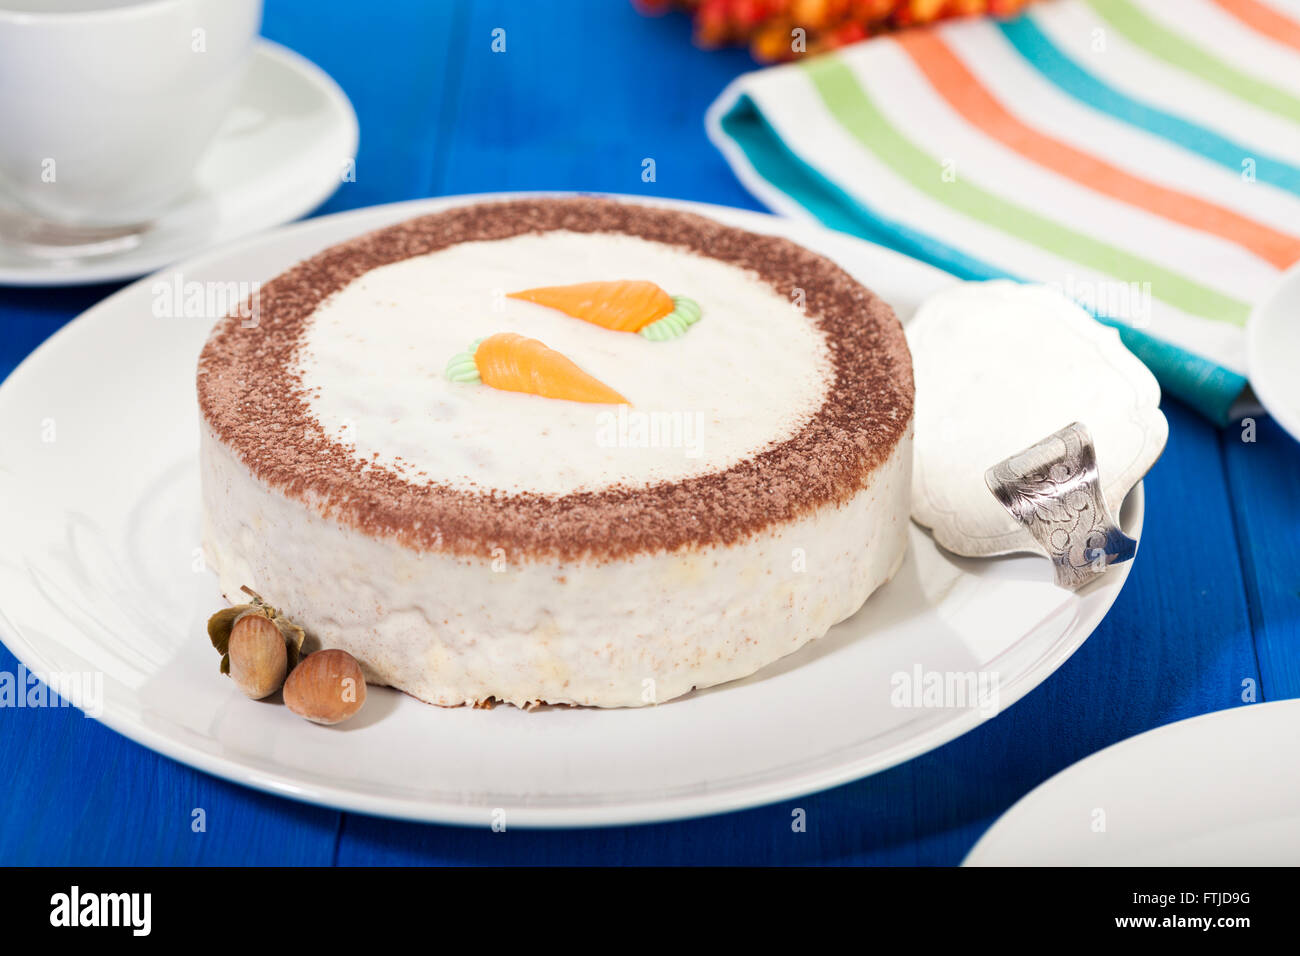 Whole Carrot Cake on coffee table Stock Photo